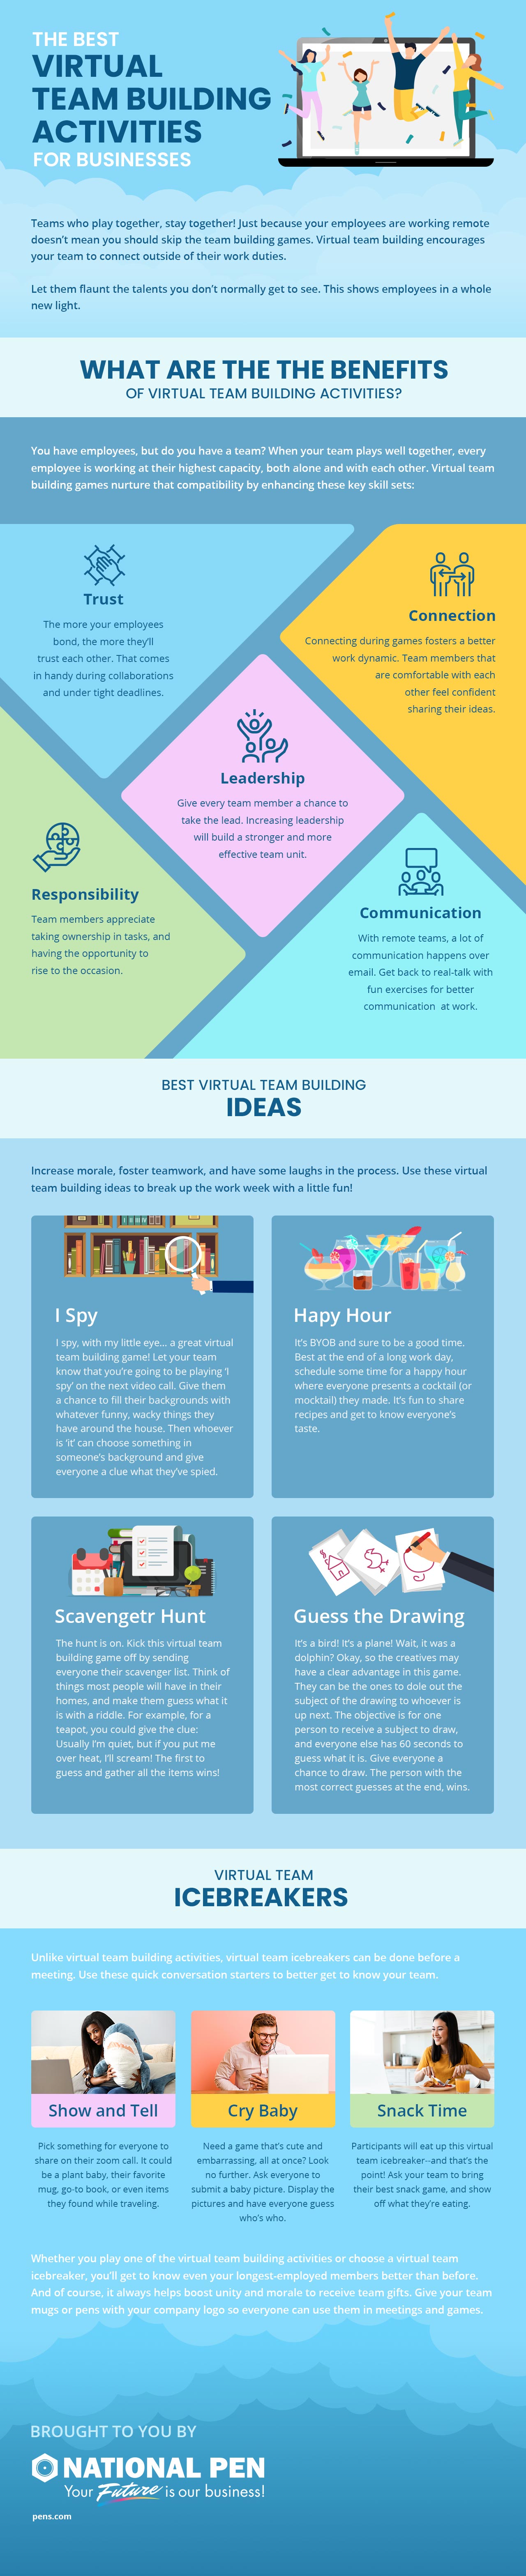 Best Virtual Team Building Activities & Ideas for Business [Infographic] -  National Pen